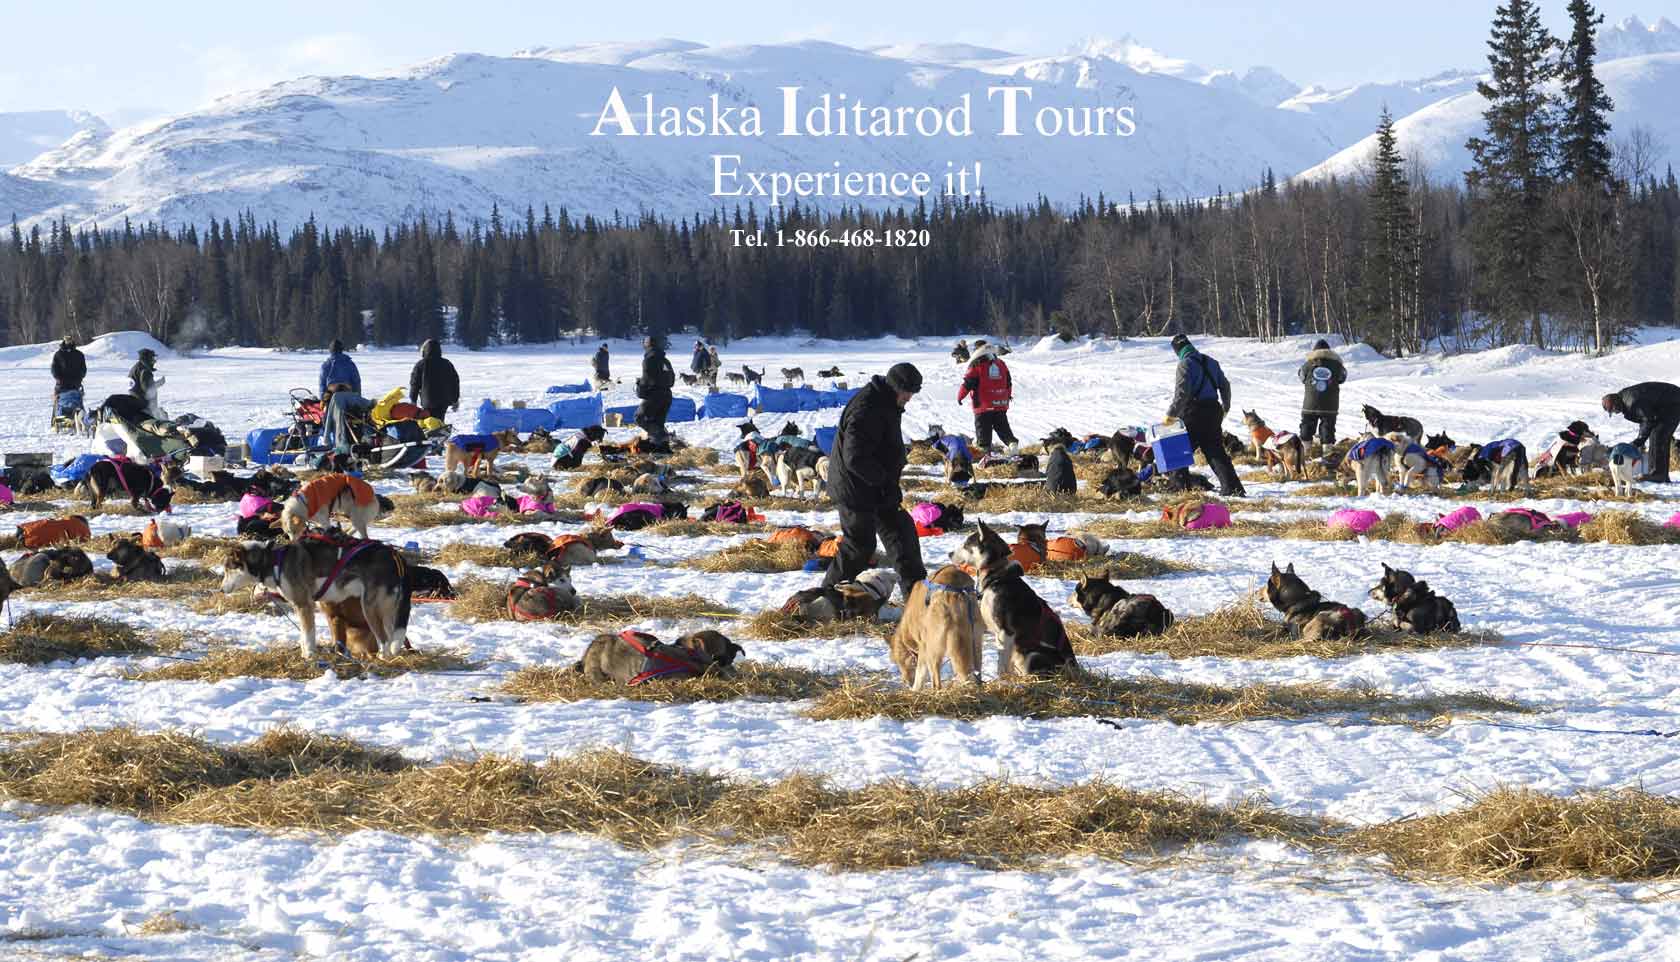 Mushers on the trail